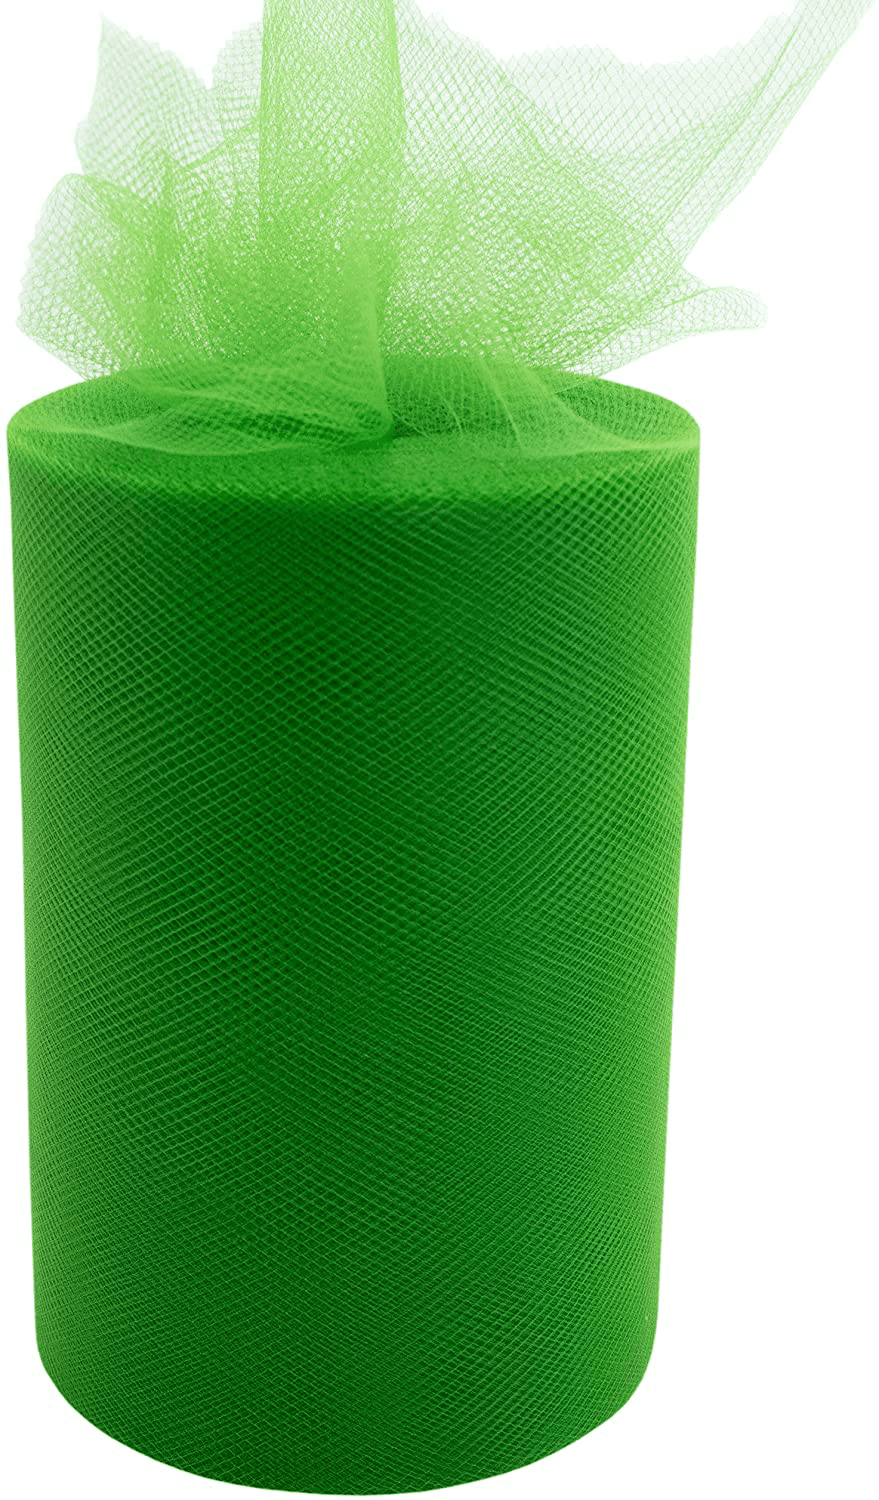 6"x100 Yards Tulle Roll Spool Tutu Wedding Gifts Craft Party Decoration Fabric 